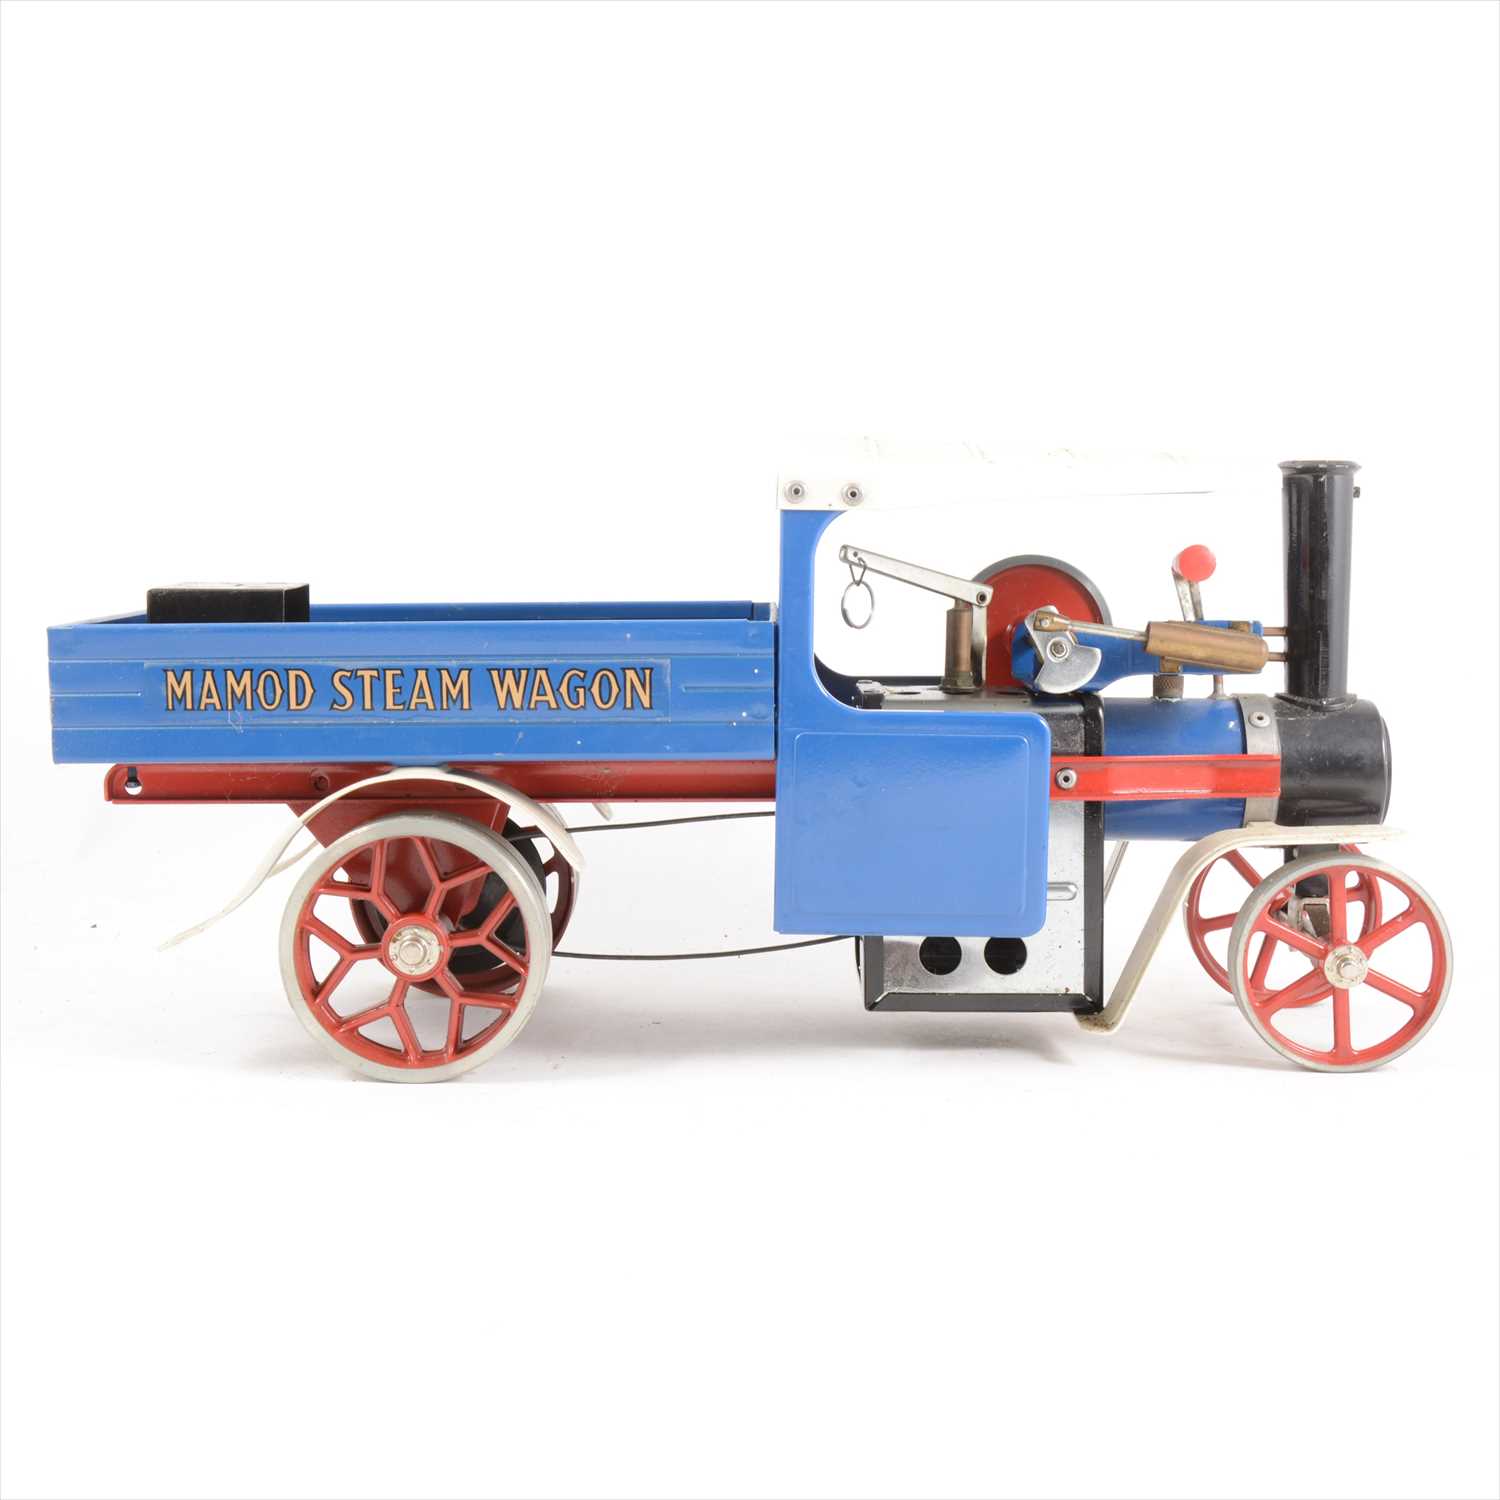 Lot 32 - Mamod live steam; SW1 steam wagon engine, blue body, with burner and scuttle, unboxed.